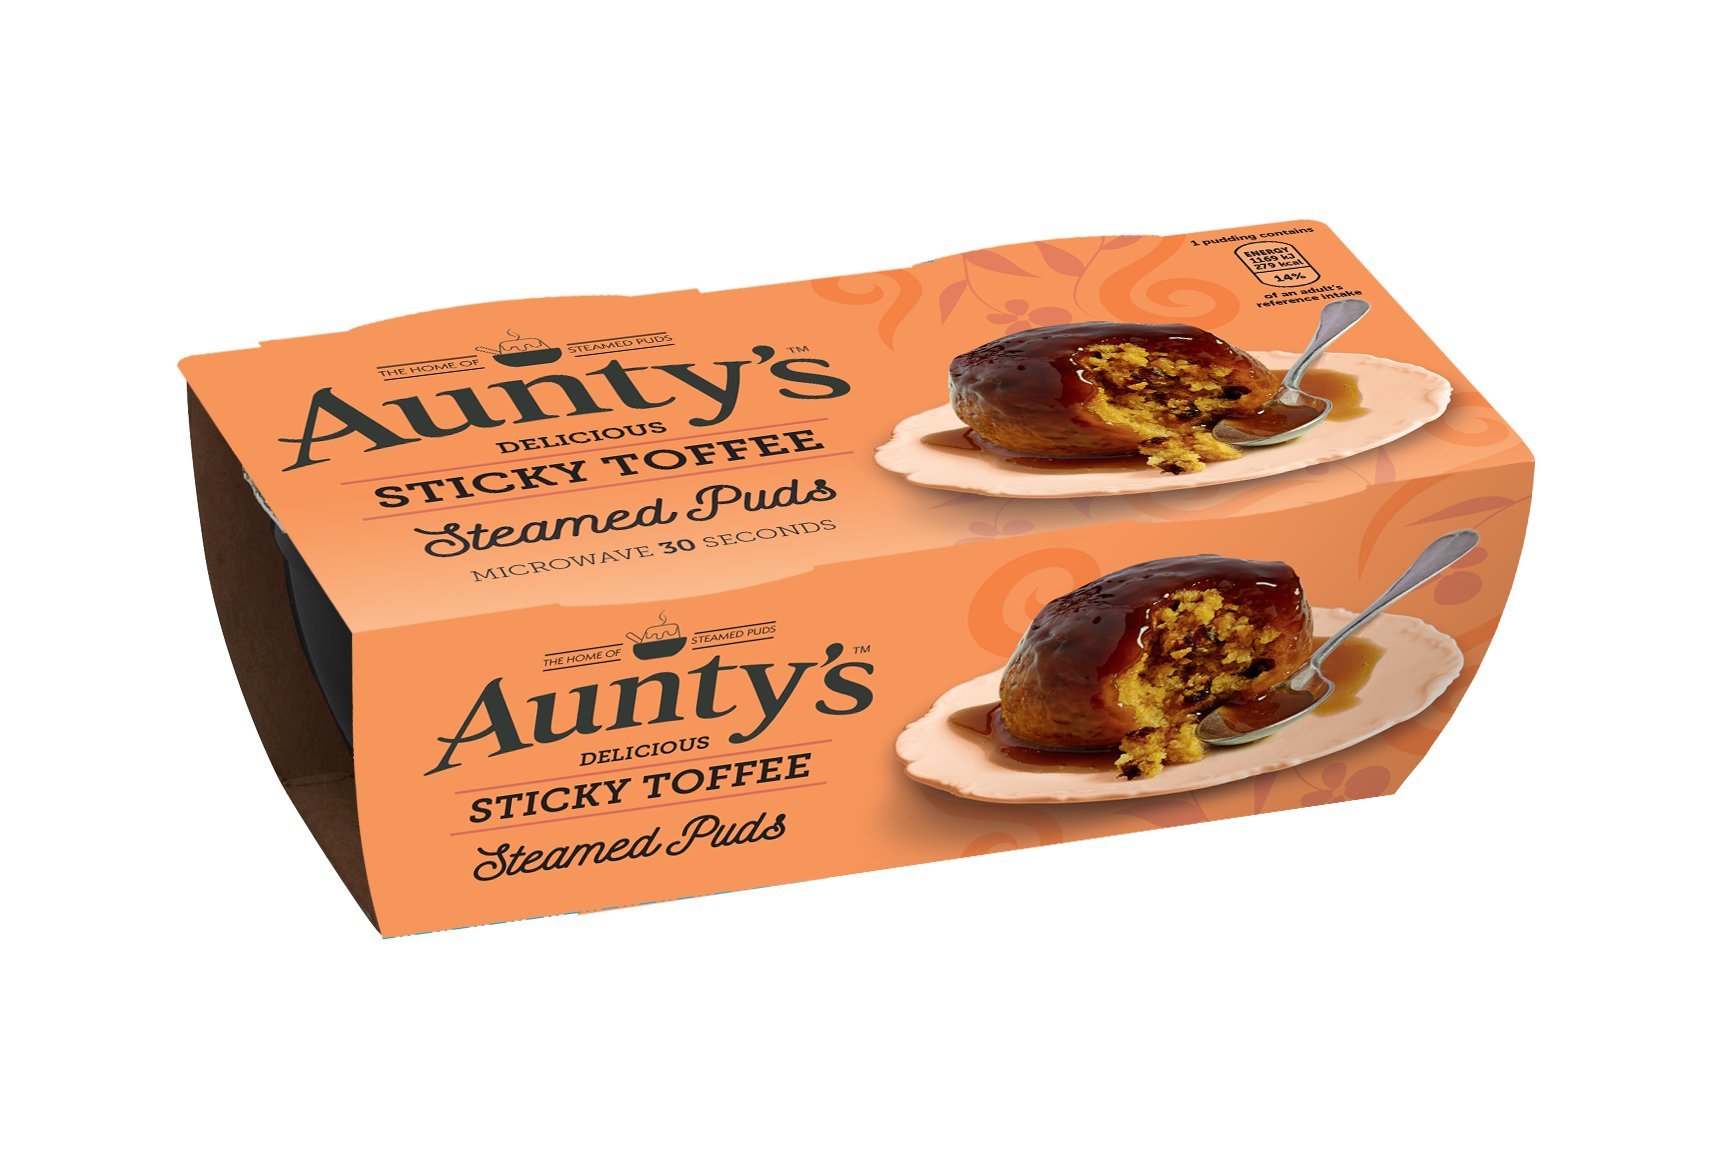 Aunty’s sticky toffee steamed puds – puddings cuits au caramel – 2x95g